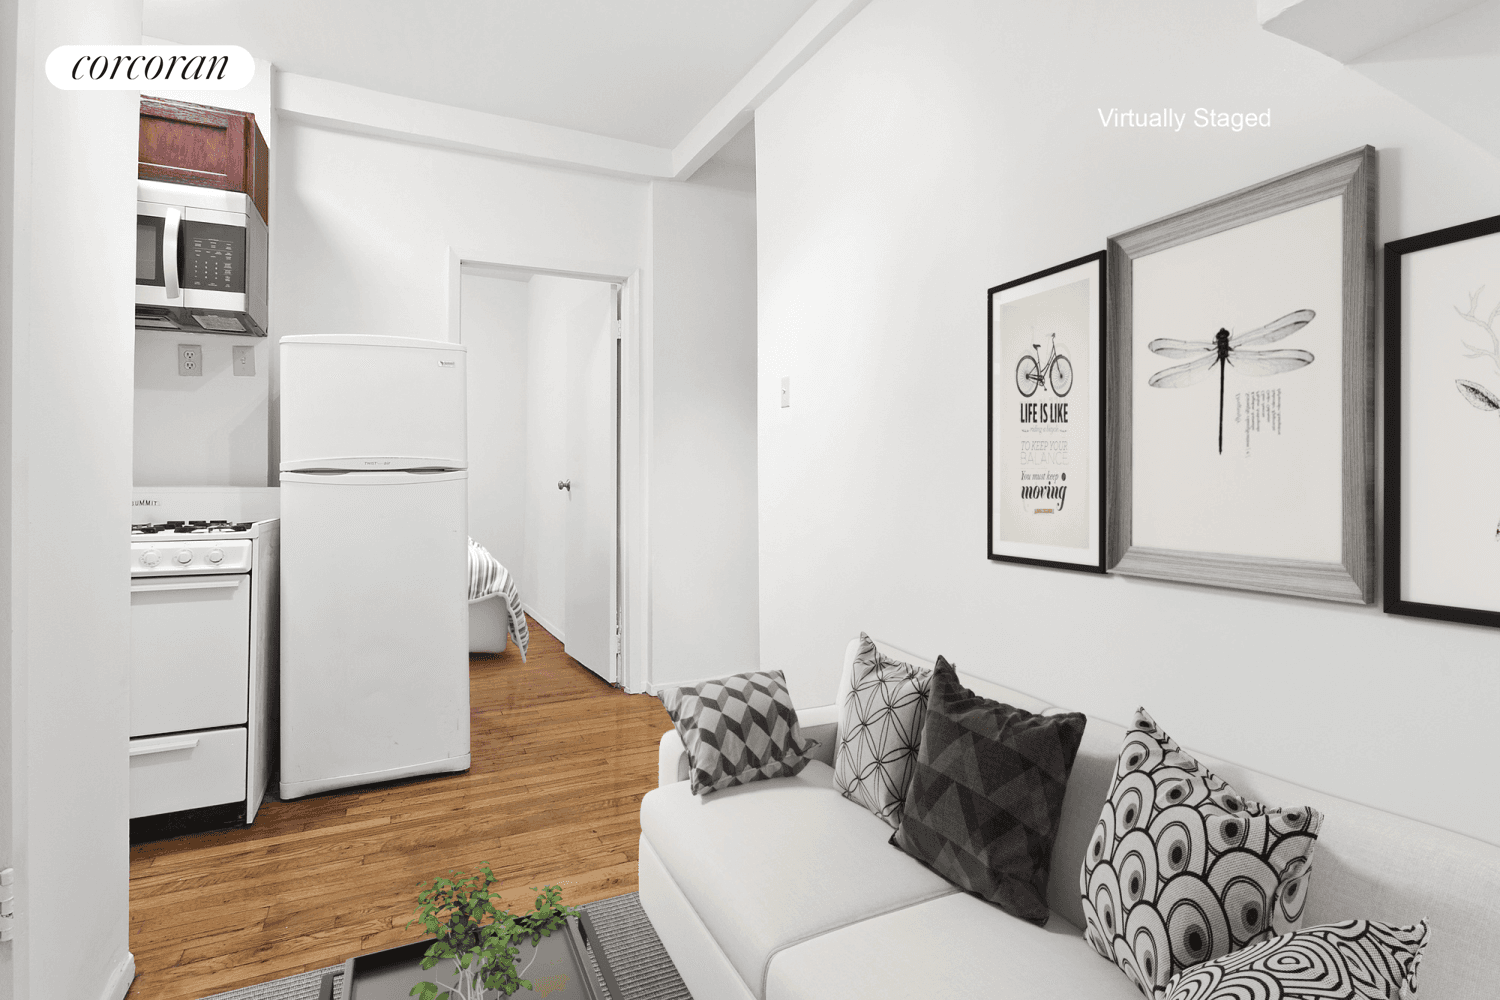 New to Market ! East Village Oasis 2 bedroom 1 bath available for an immediate move inWelcome to your cozy urban retreat in the heart of the vibrant East Village ...